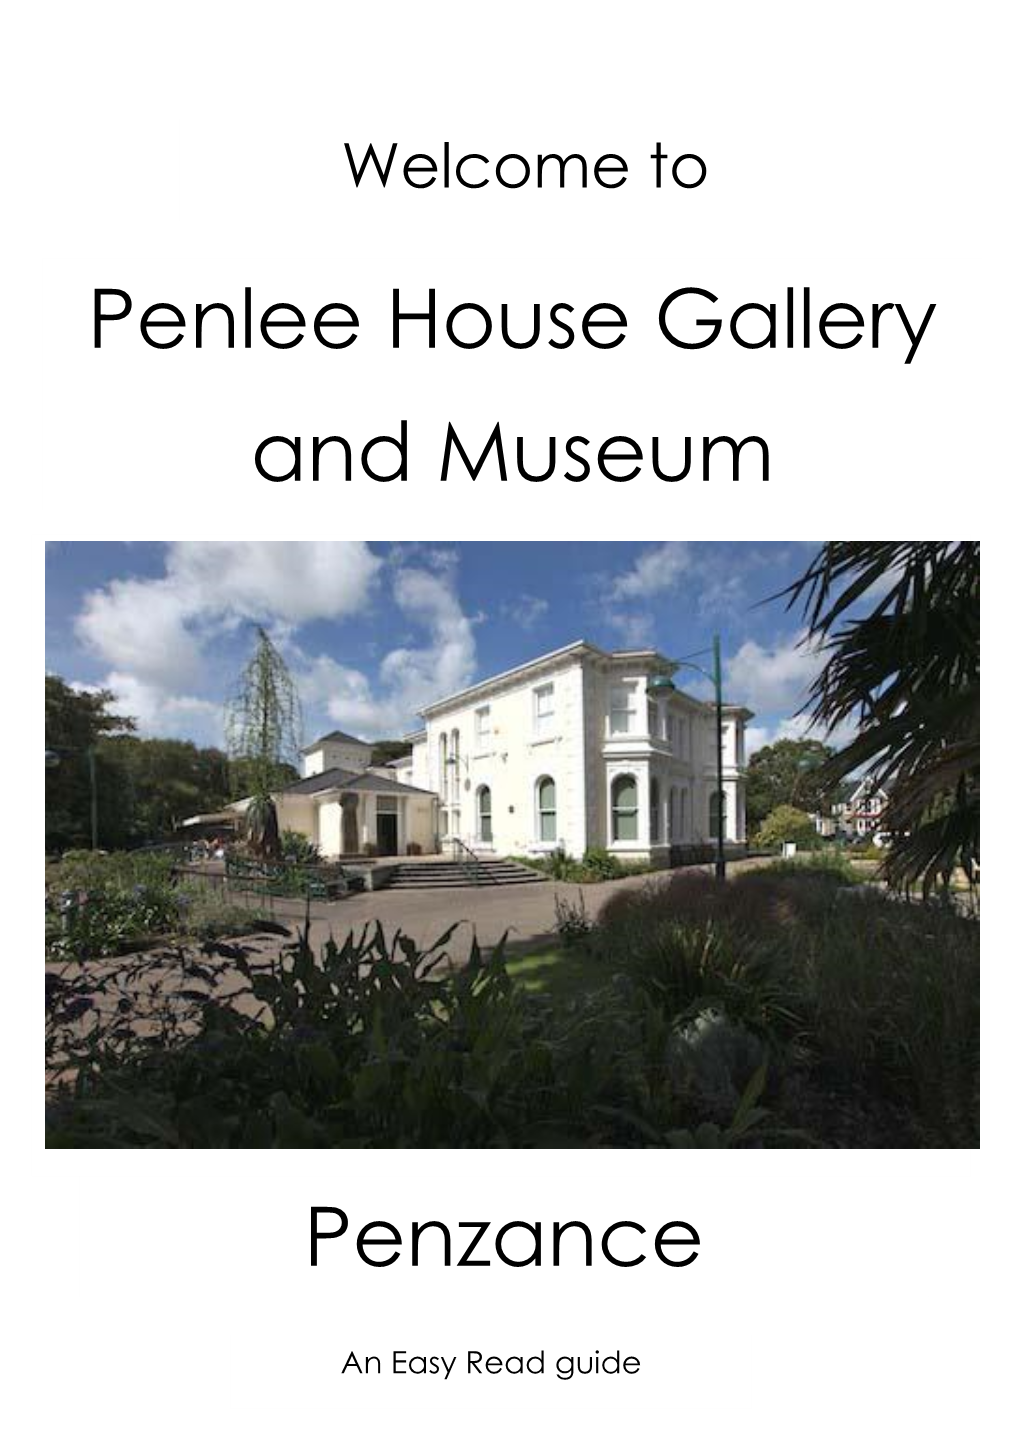 Penlee House Gallery and Museum Penzance